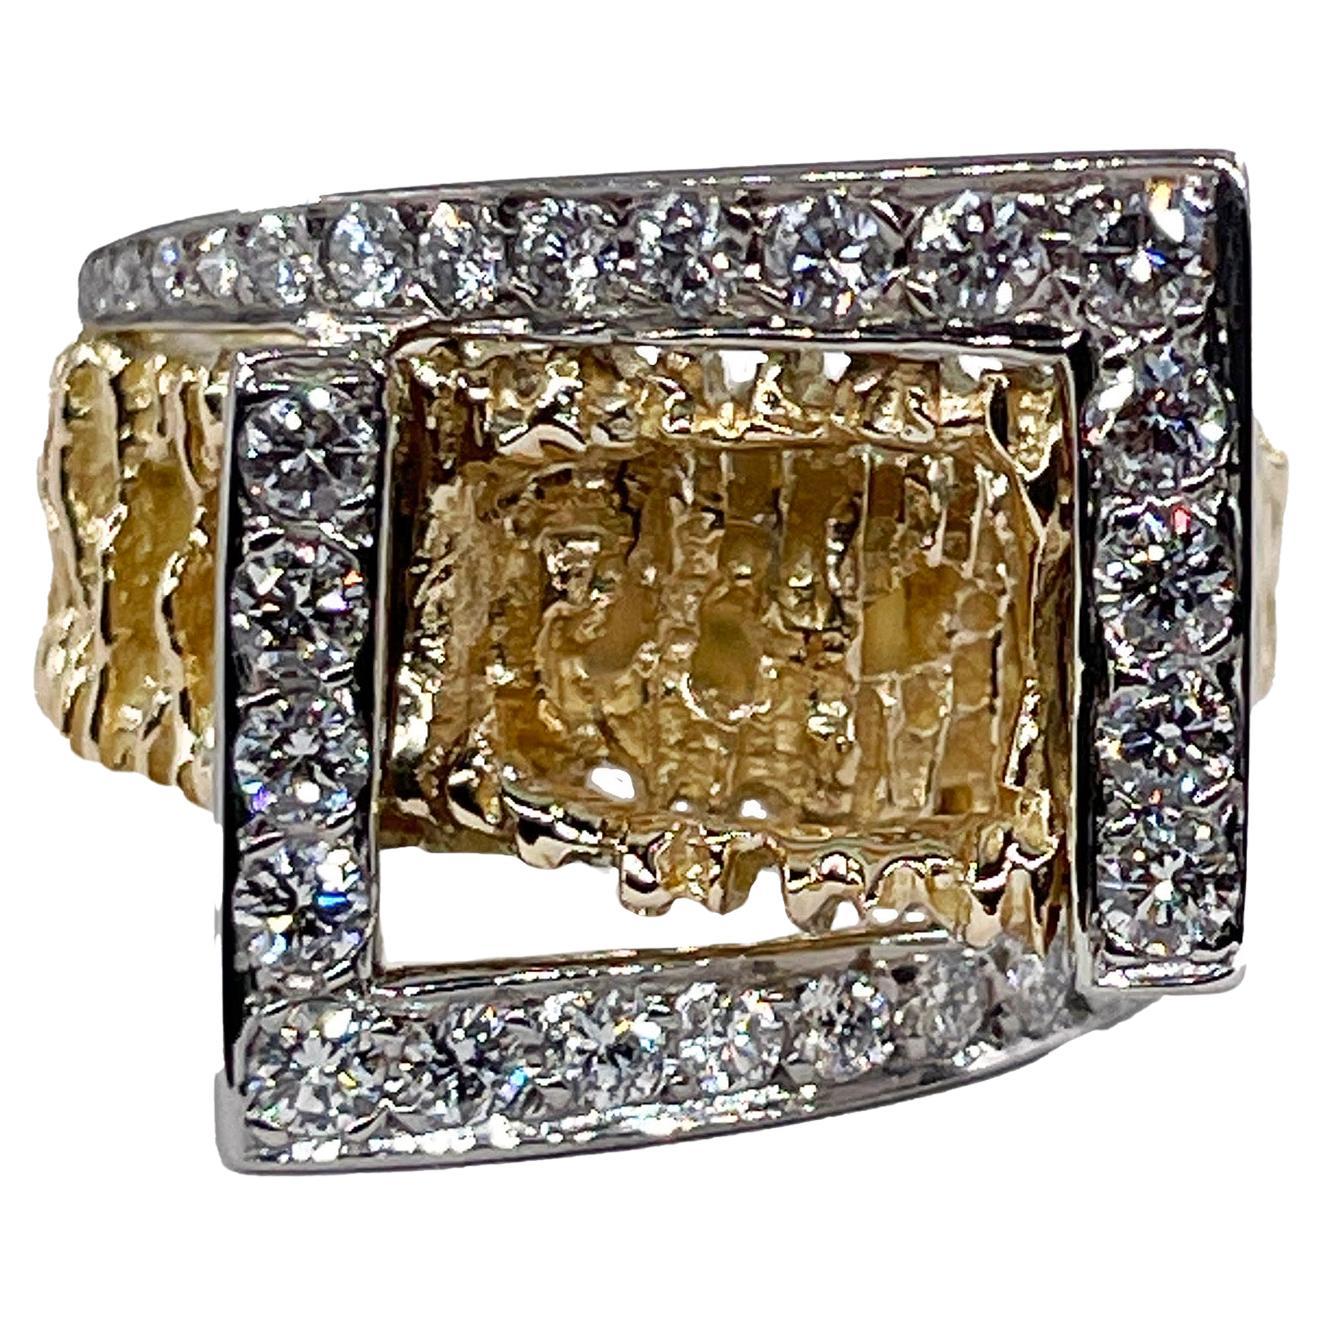 Vintage 18K Yellow Gold 0.80ct Diamond Nugget Free Form Ring; Diamond Dinner Ring; Diamond Sculptural Geometric Architectural Ring.
From the fabulous and glamorous 1970s comes this splendid Diamond Nugget Ring that reminds of the California Gold